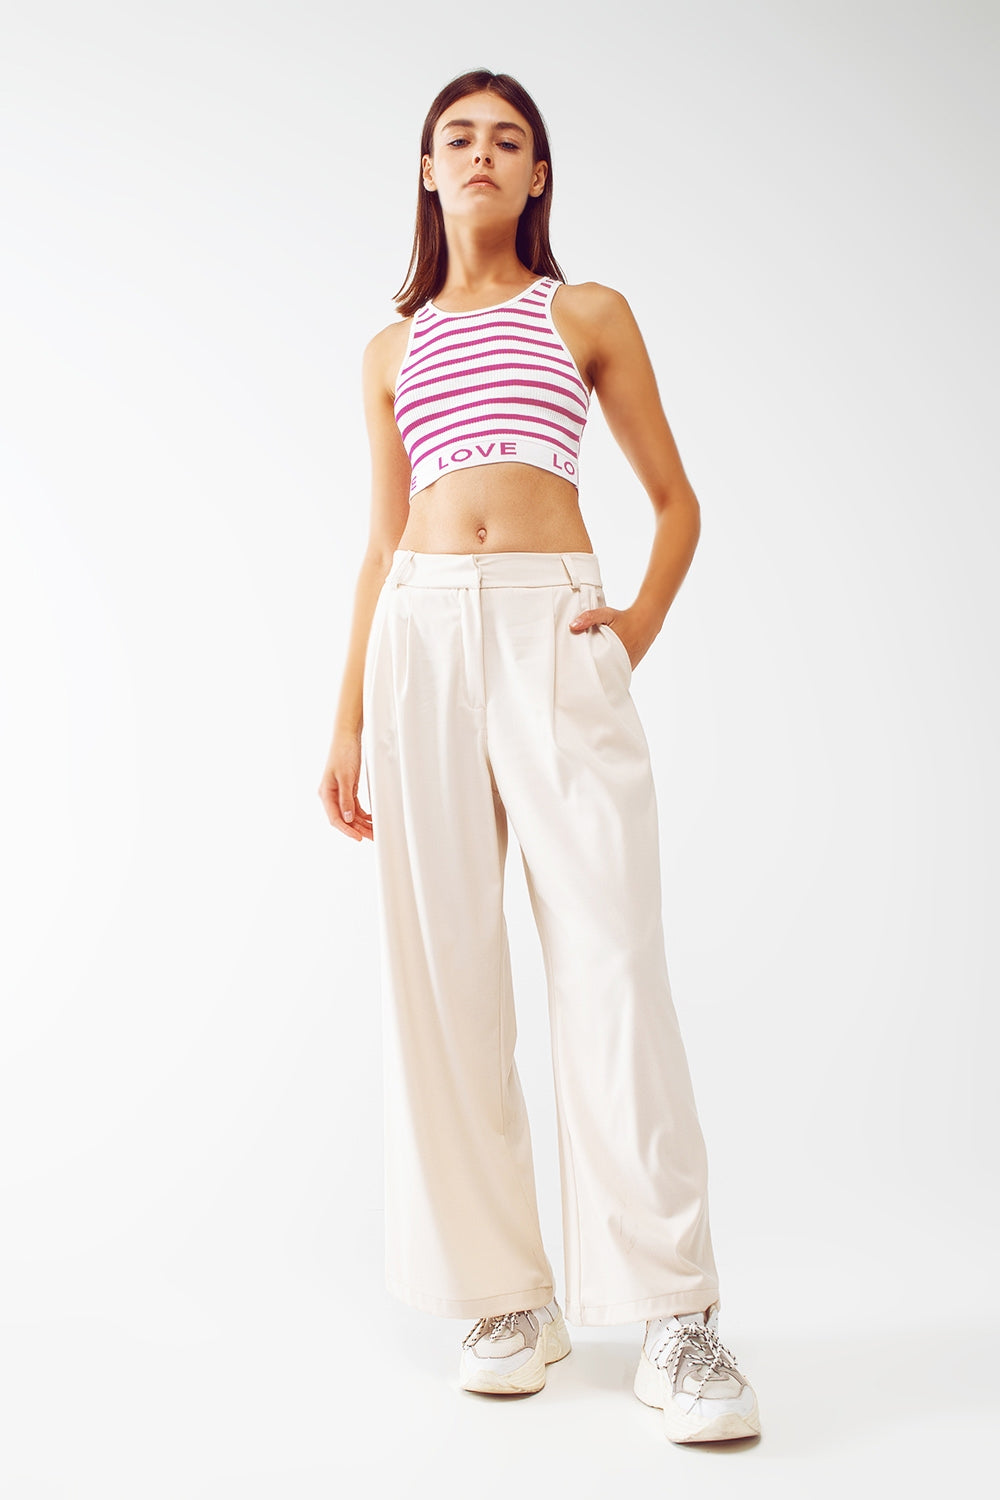 Striped Cropped Top with Love Text in pink - Szua Store